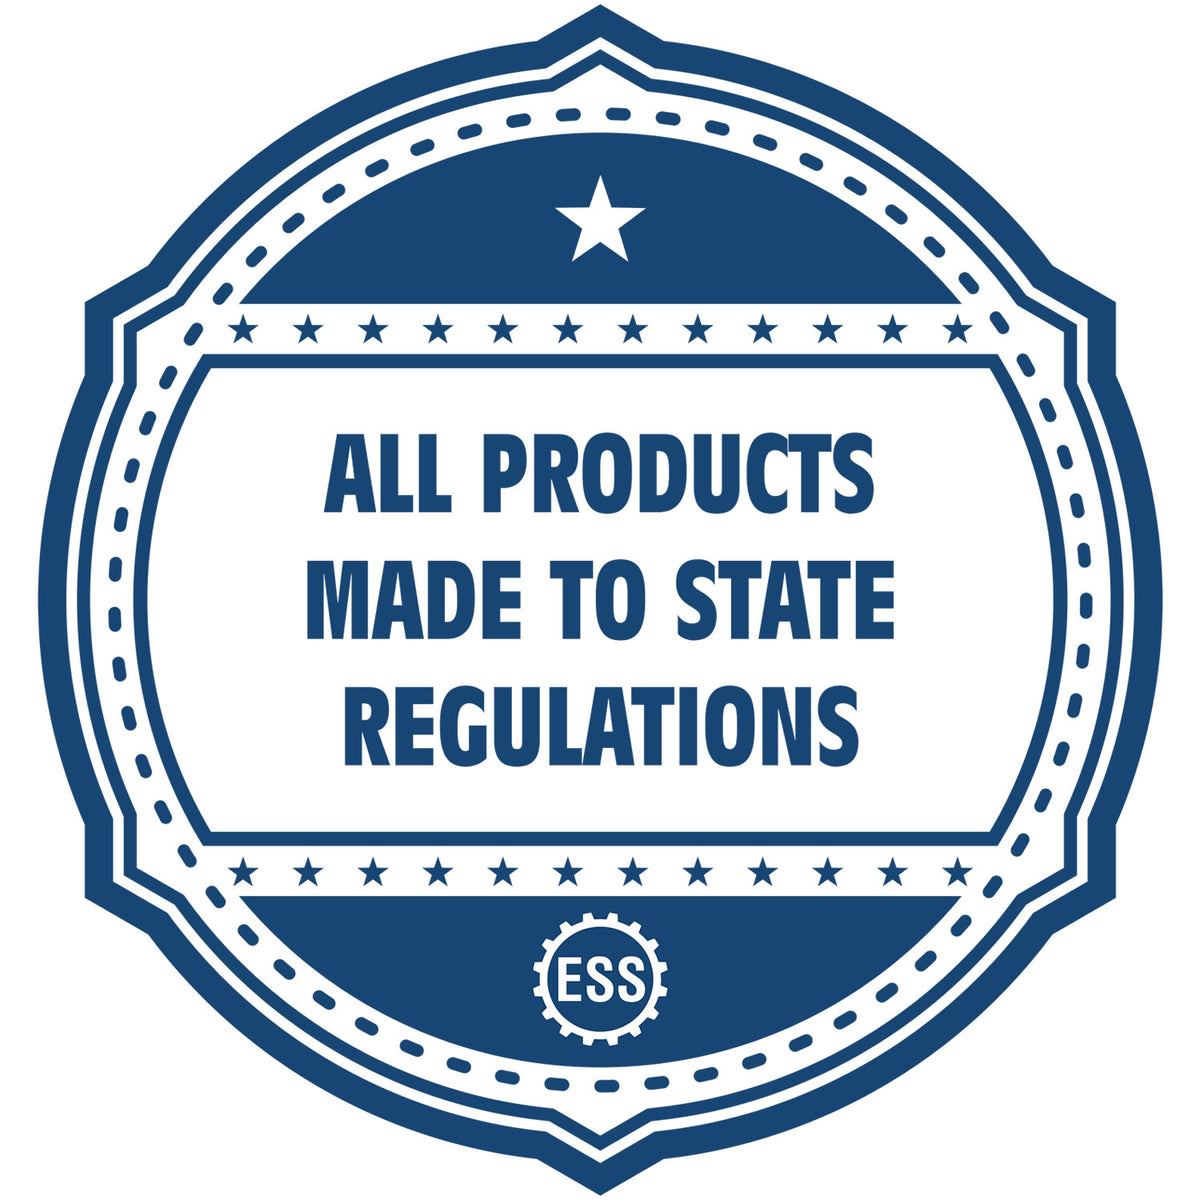 A blue icon or badge for the Gift Oklahoma Landscape Architect Seal showing that this product is made in compliance with state regulations.